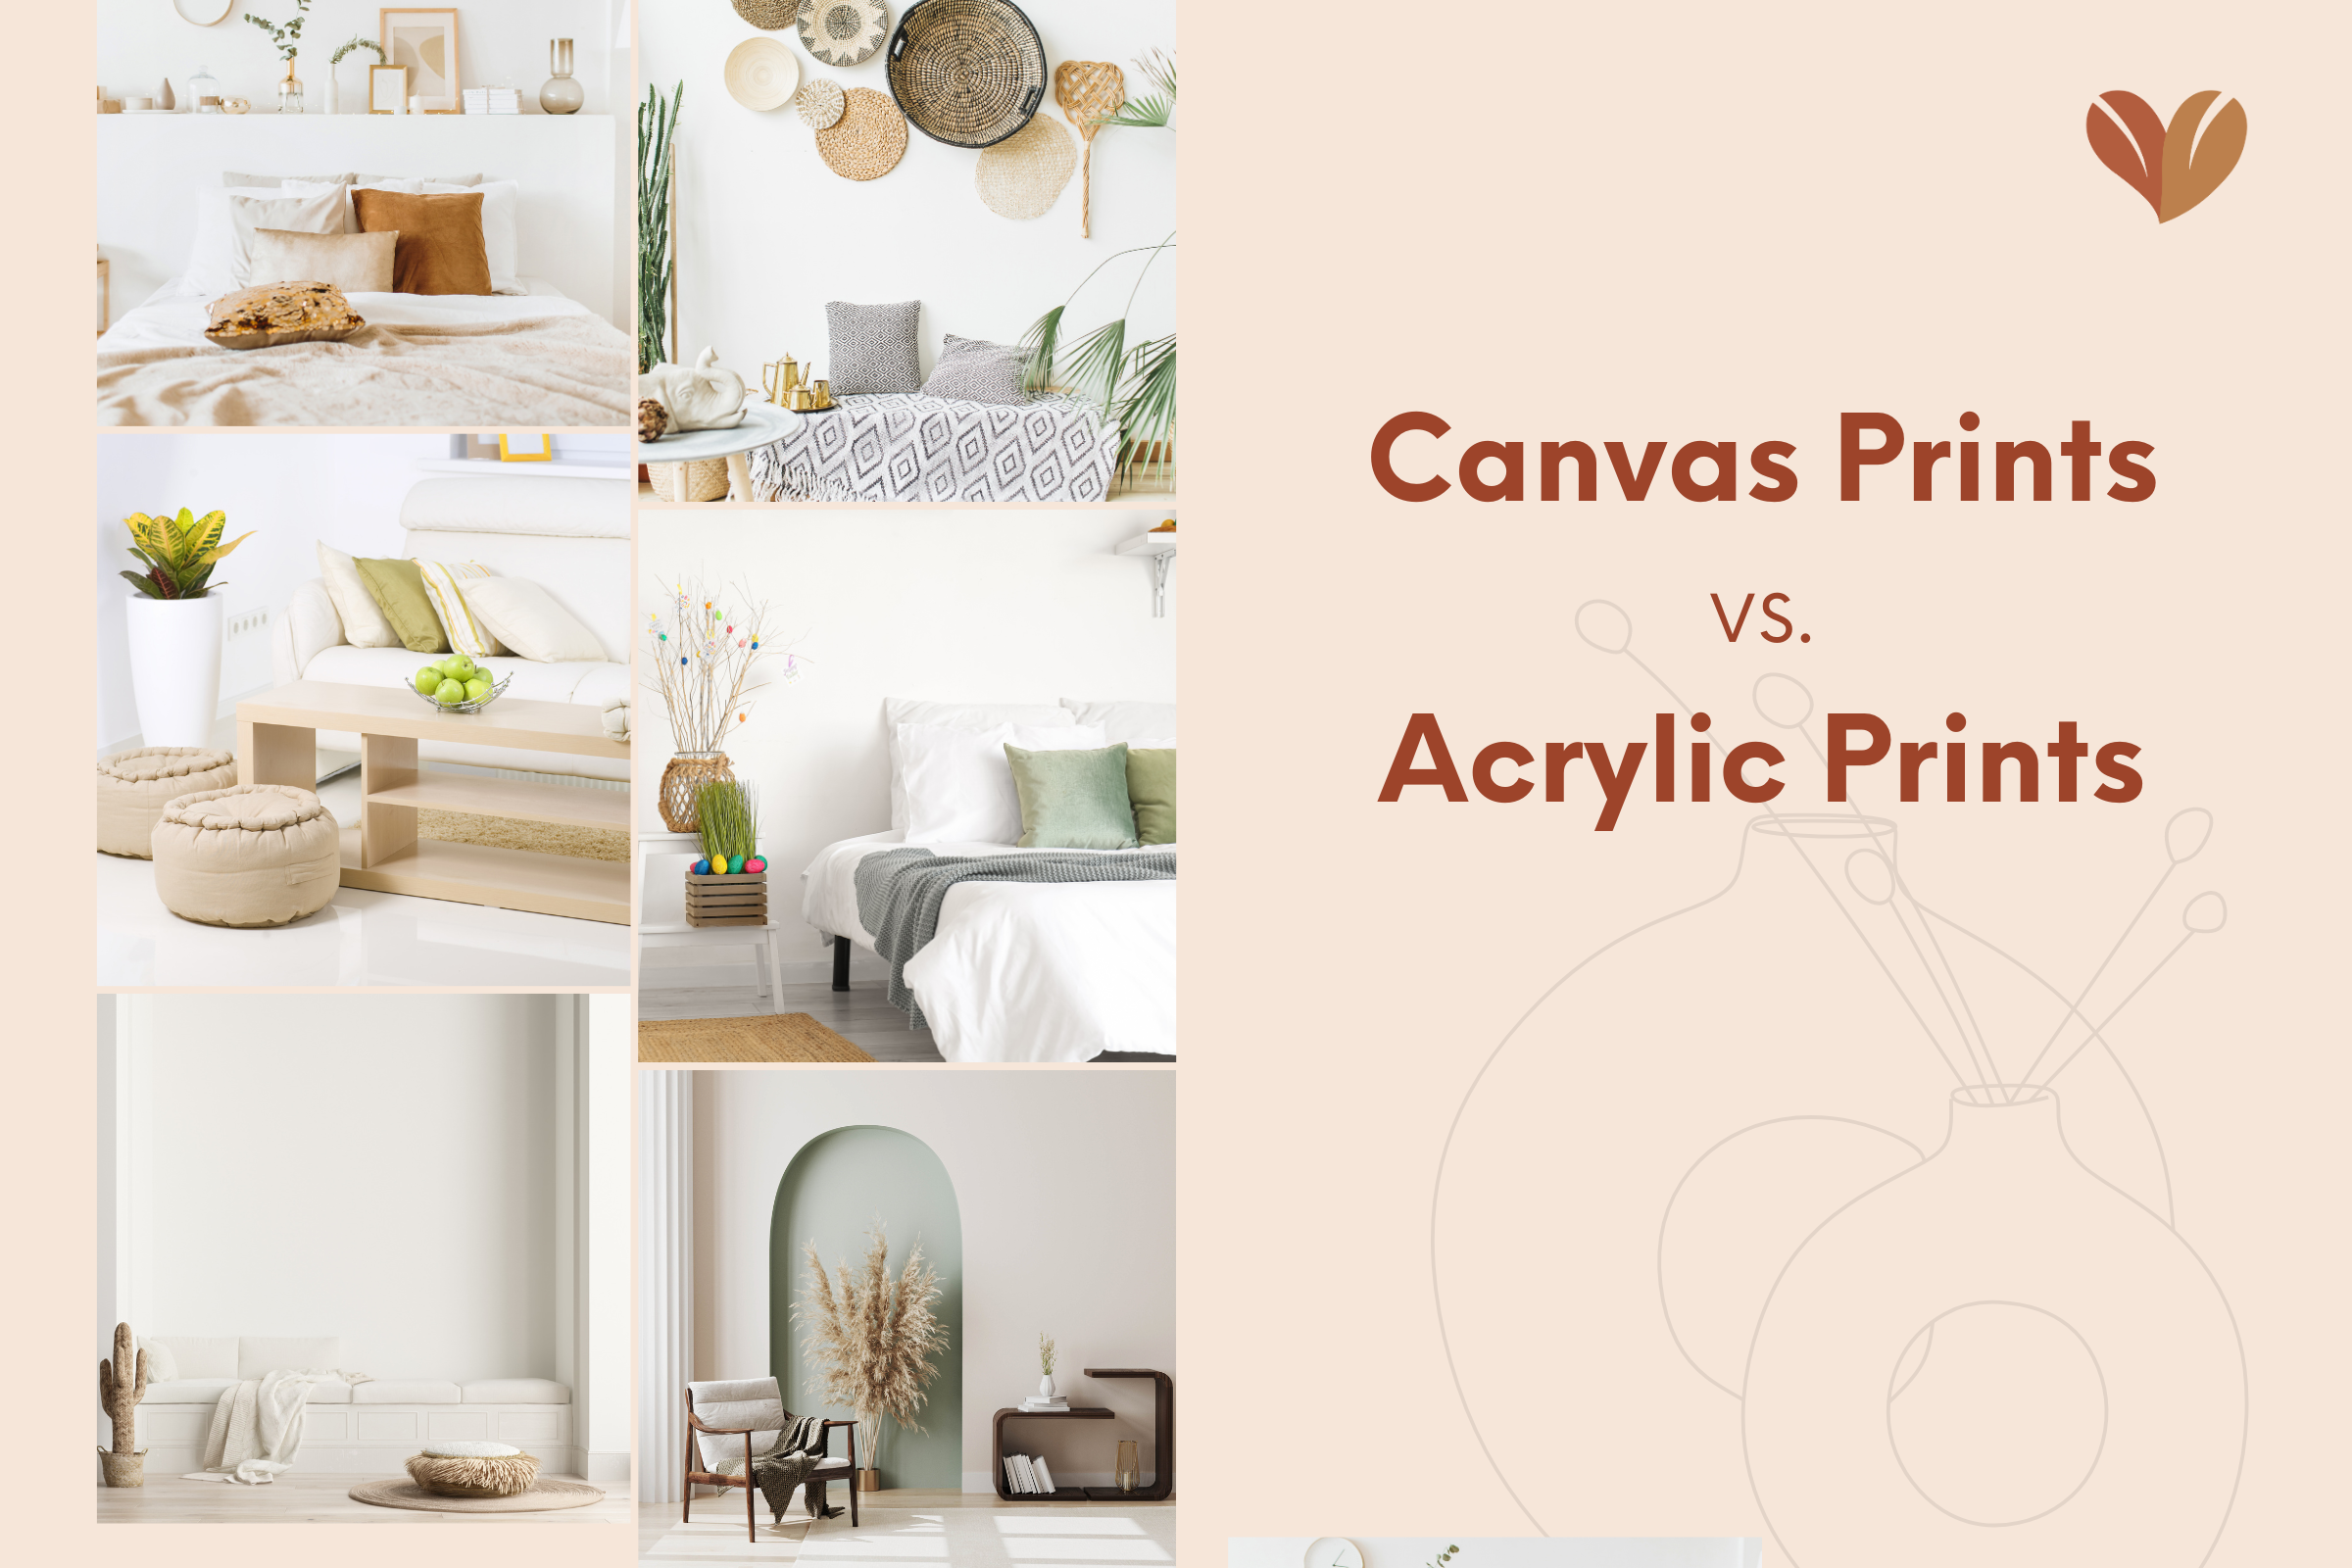 Discover the key differences between acrylic prints and canvas prints for your home décor needs